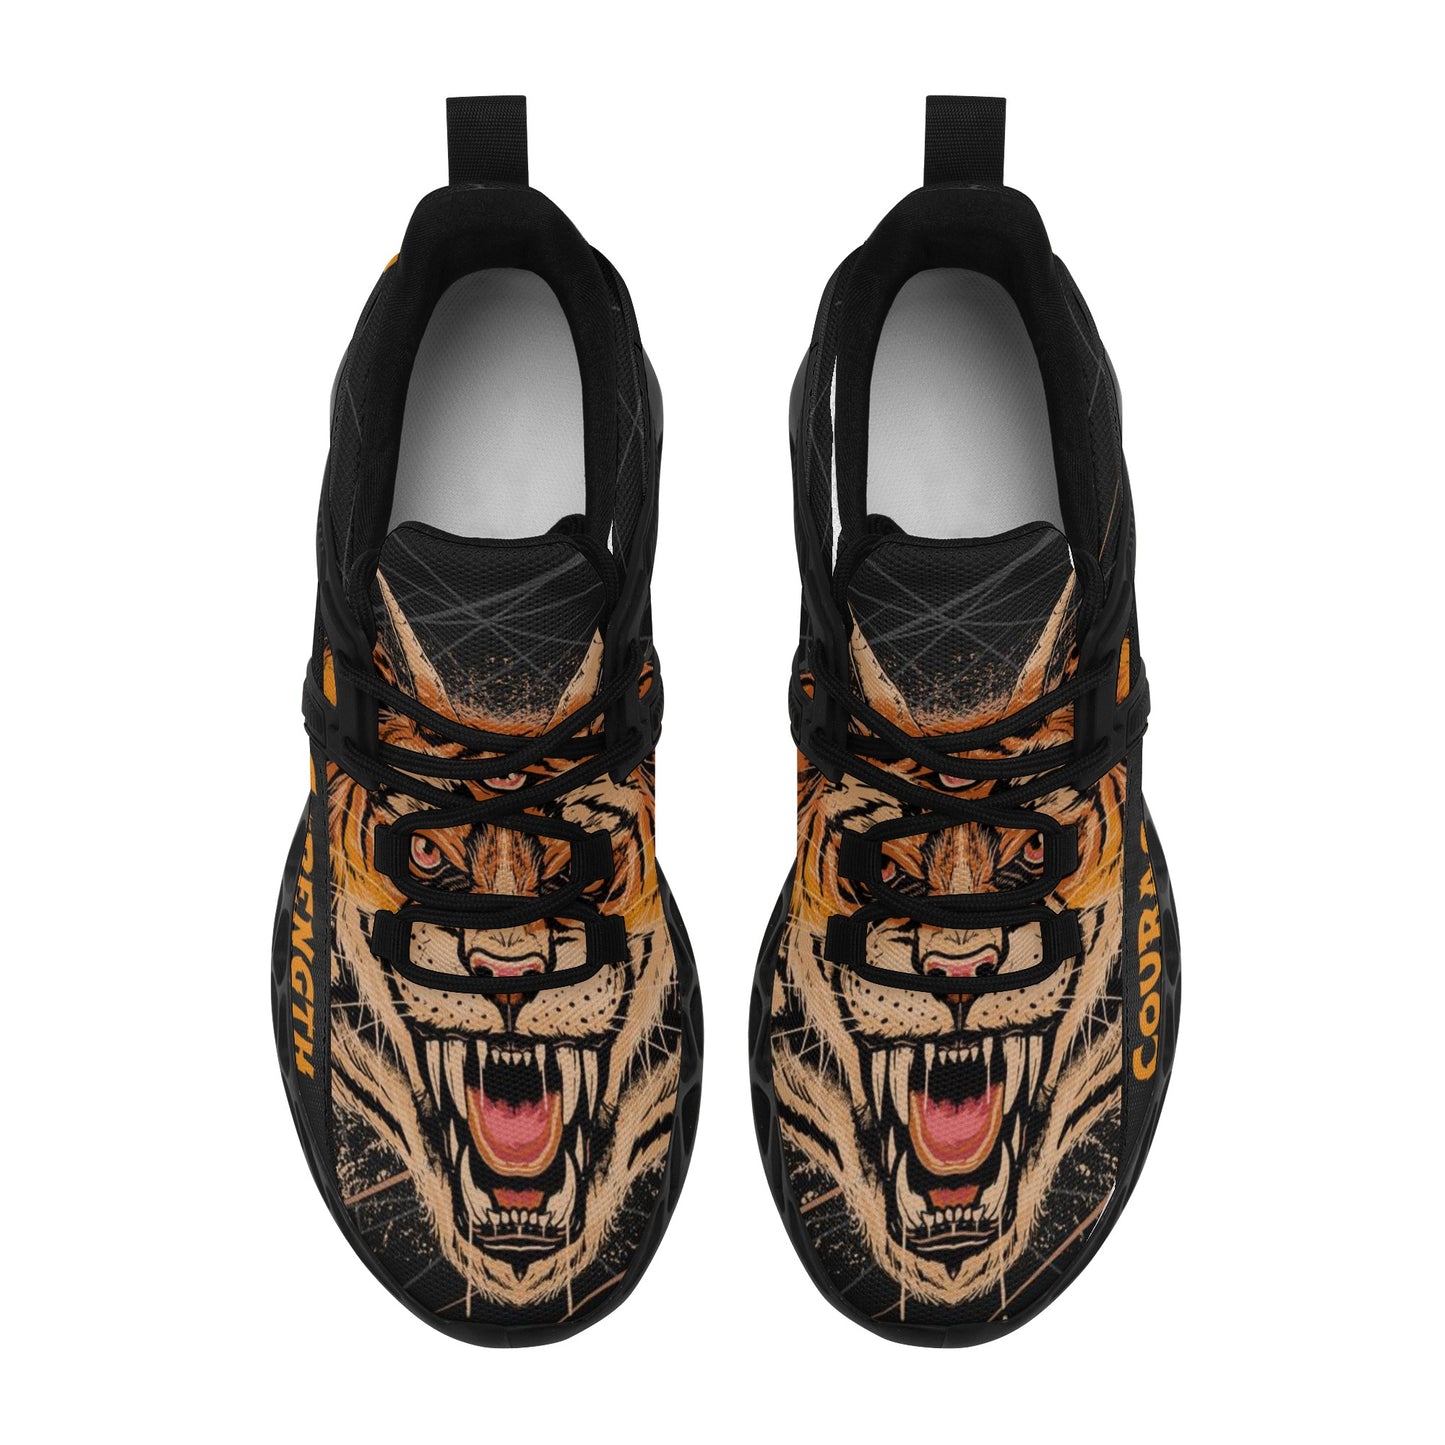 Eye Of The Tiger | Men's New Elastic Sport Sneakers - Comfortable, Breathable, and Stylish - AGTC